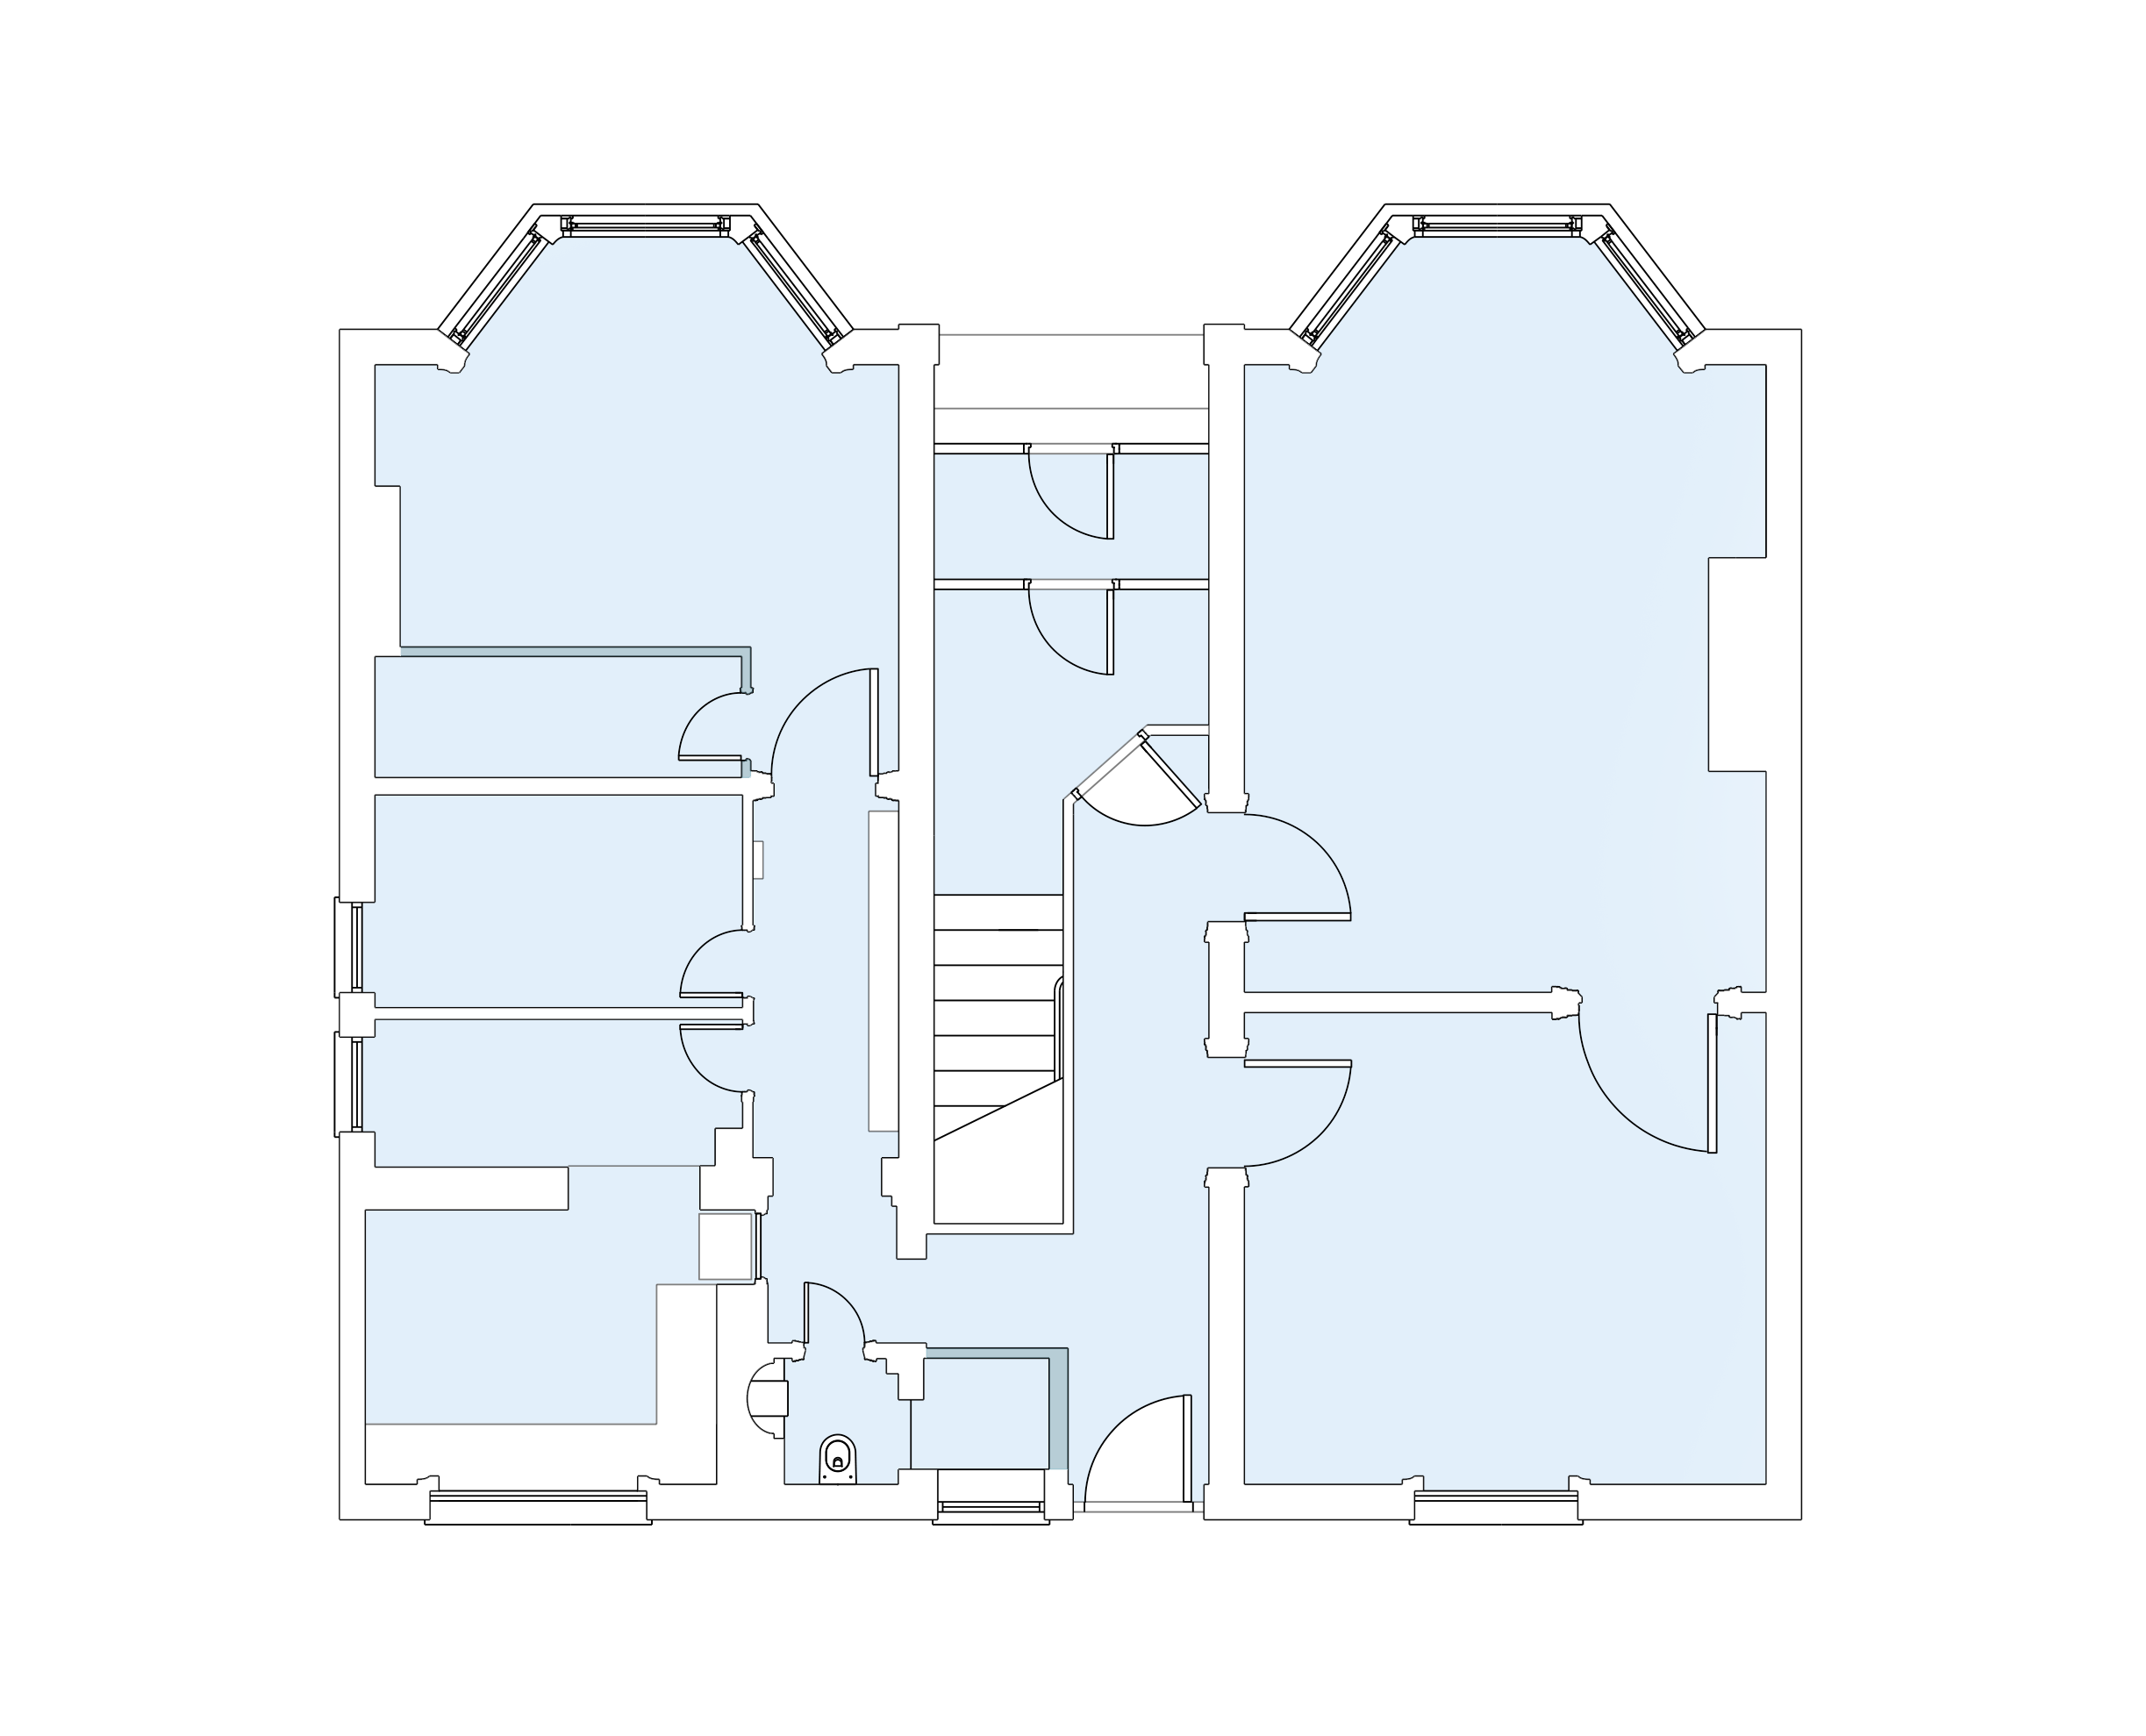 an image showing a floor plan of an existing project in Hove